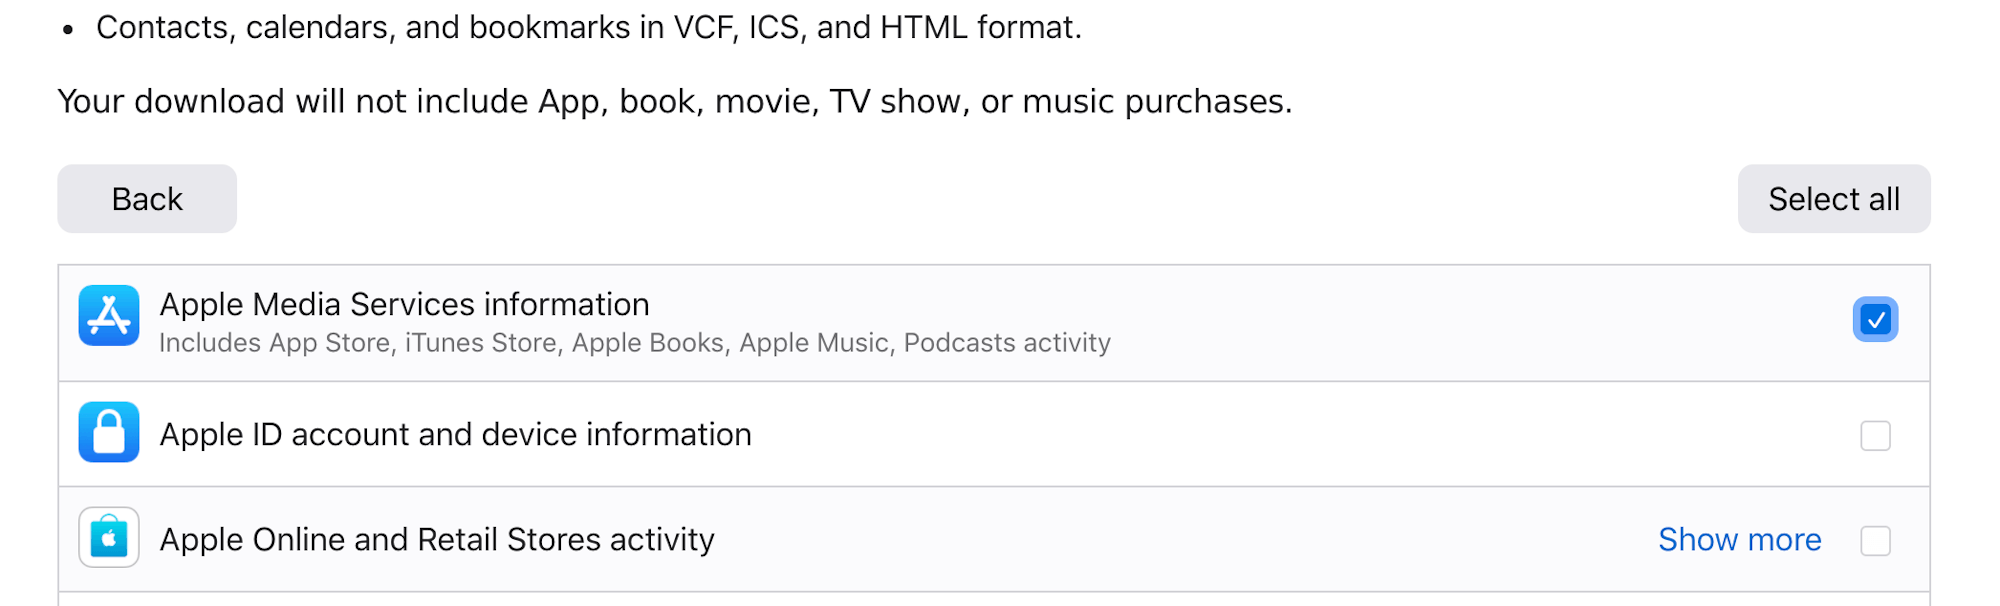 Select the first row Apple Media Services information